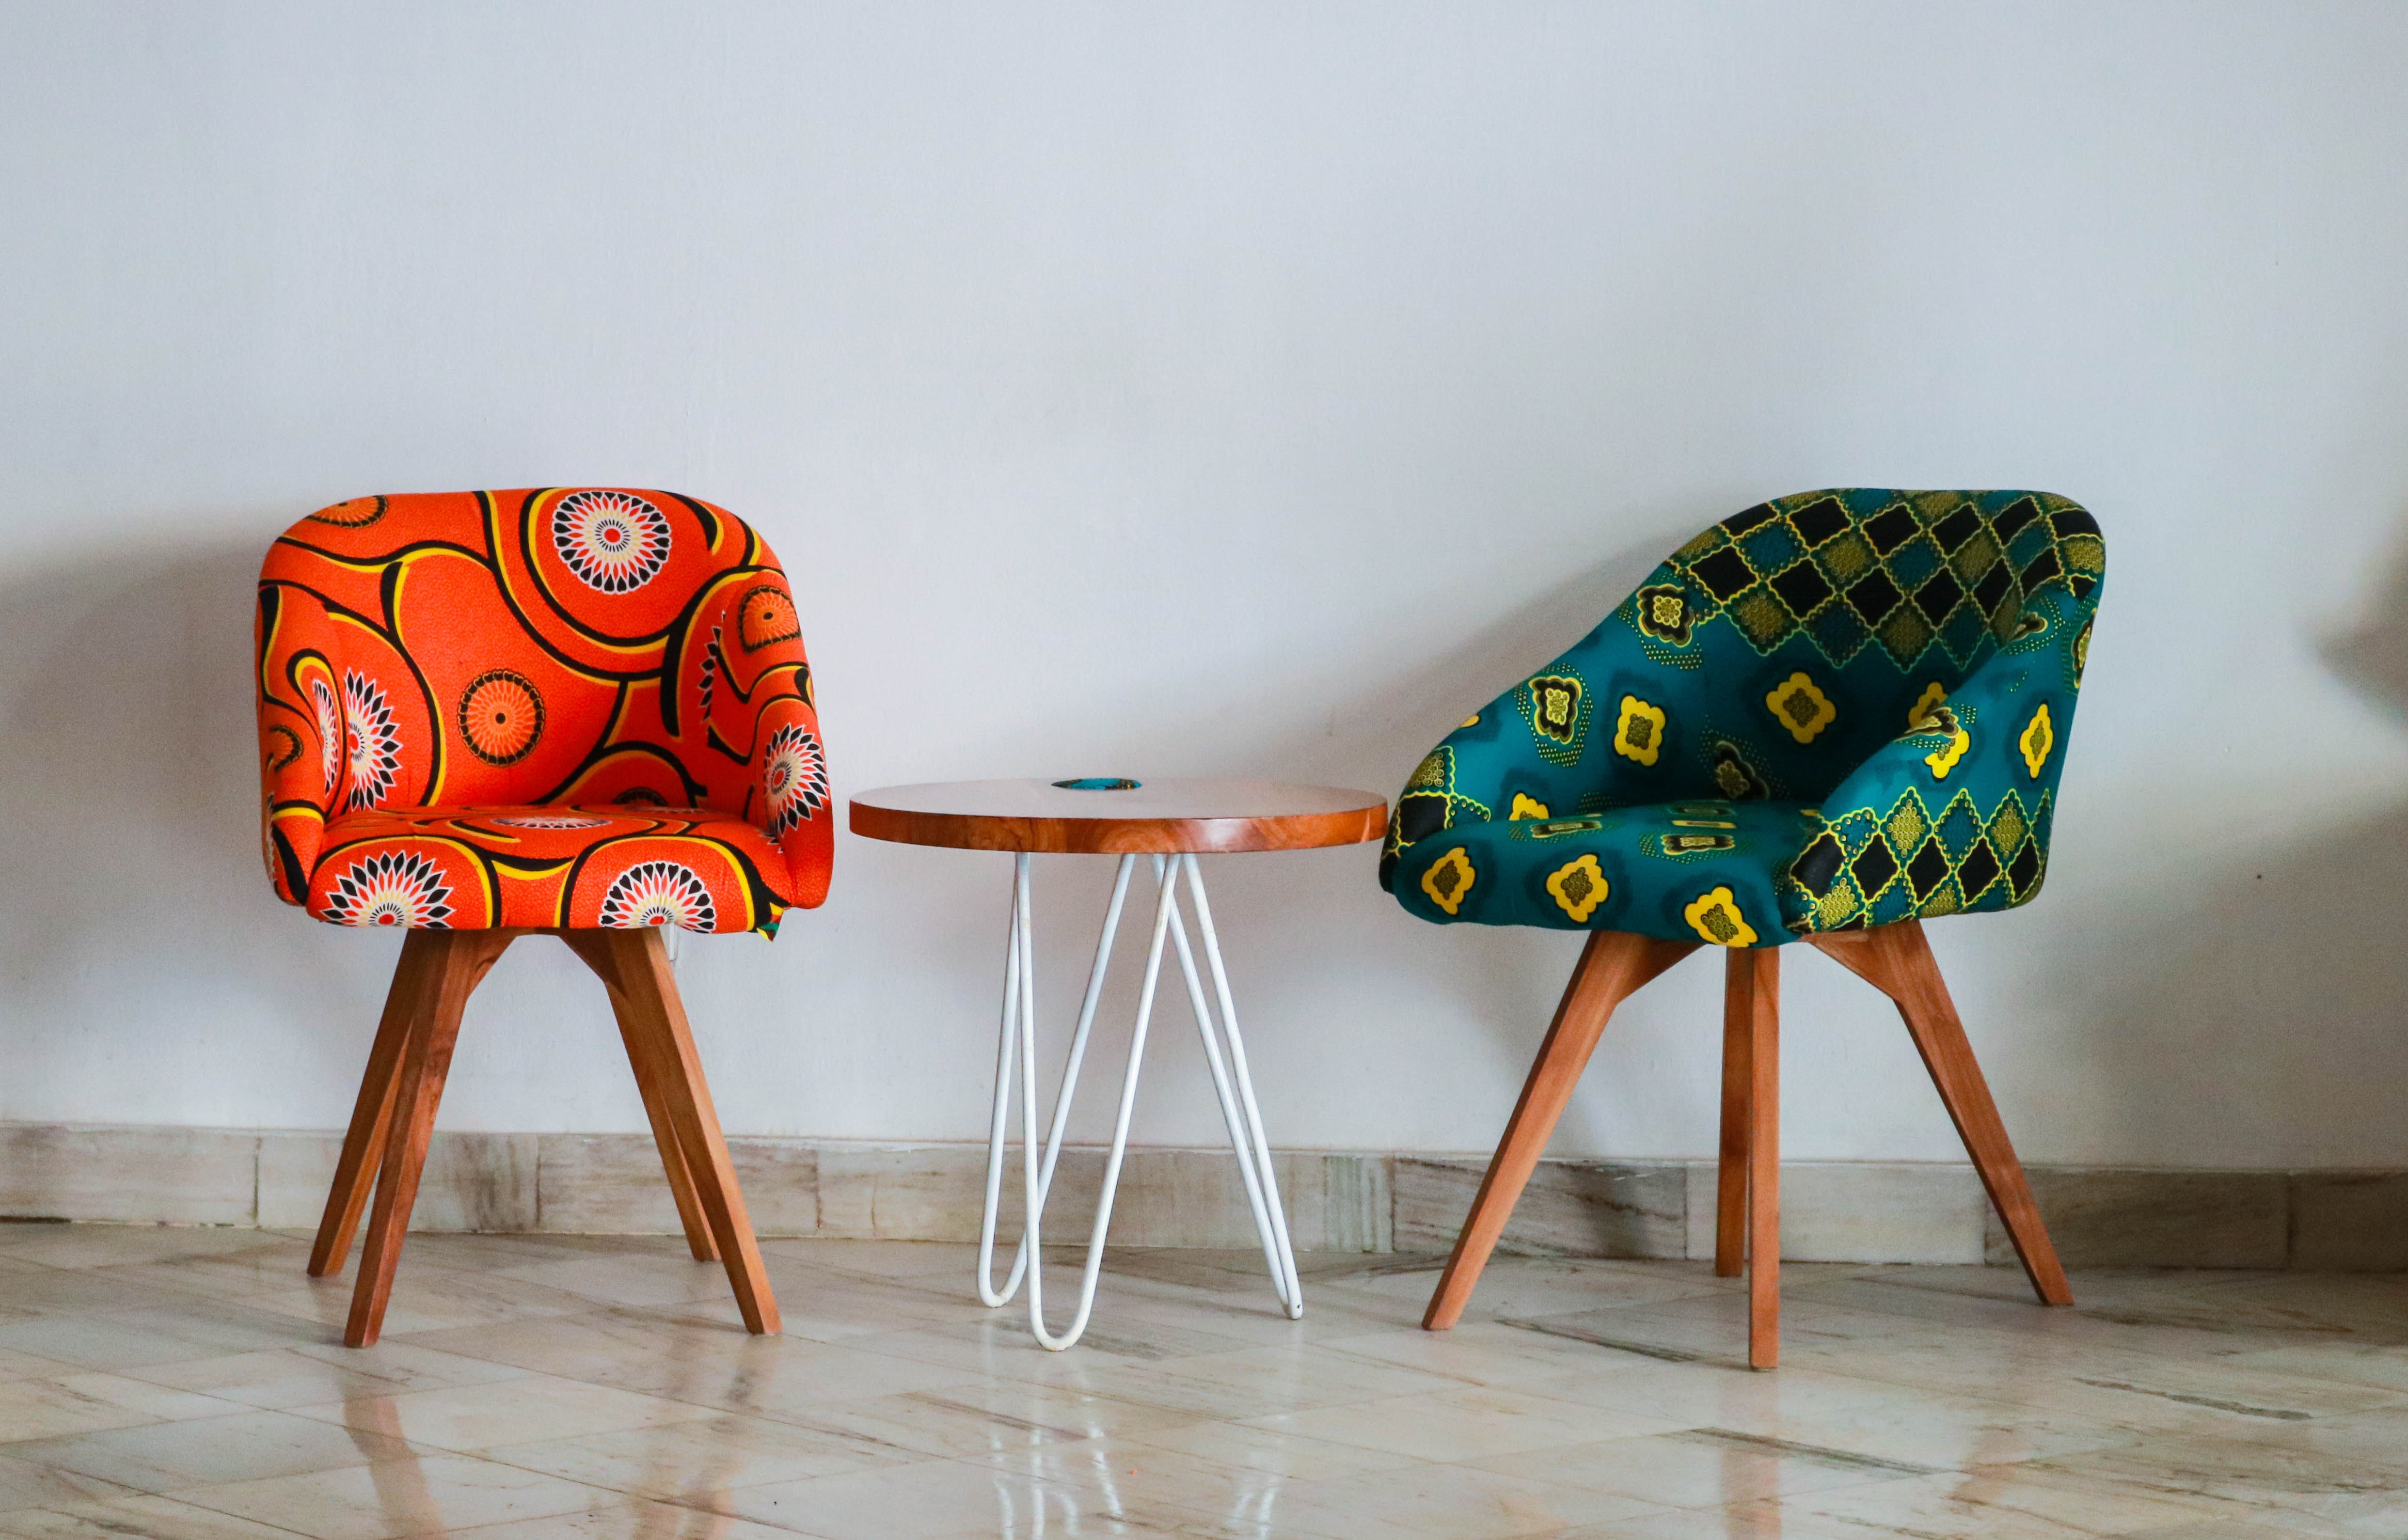  art-chairs-color-1350789